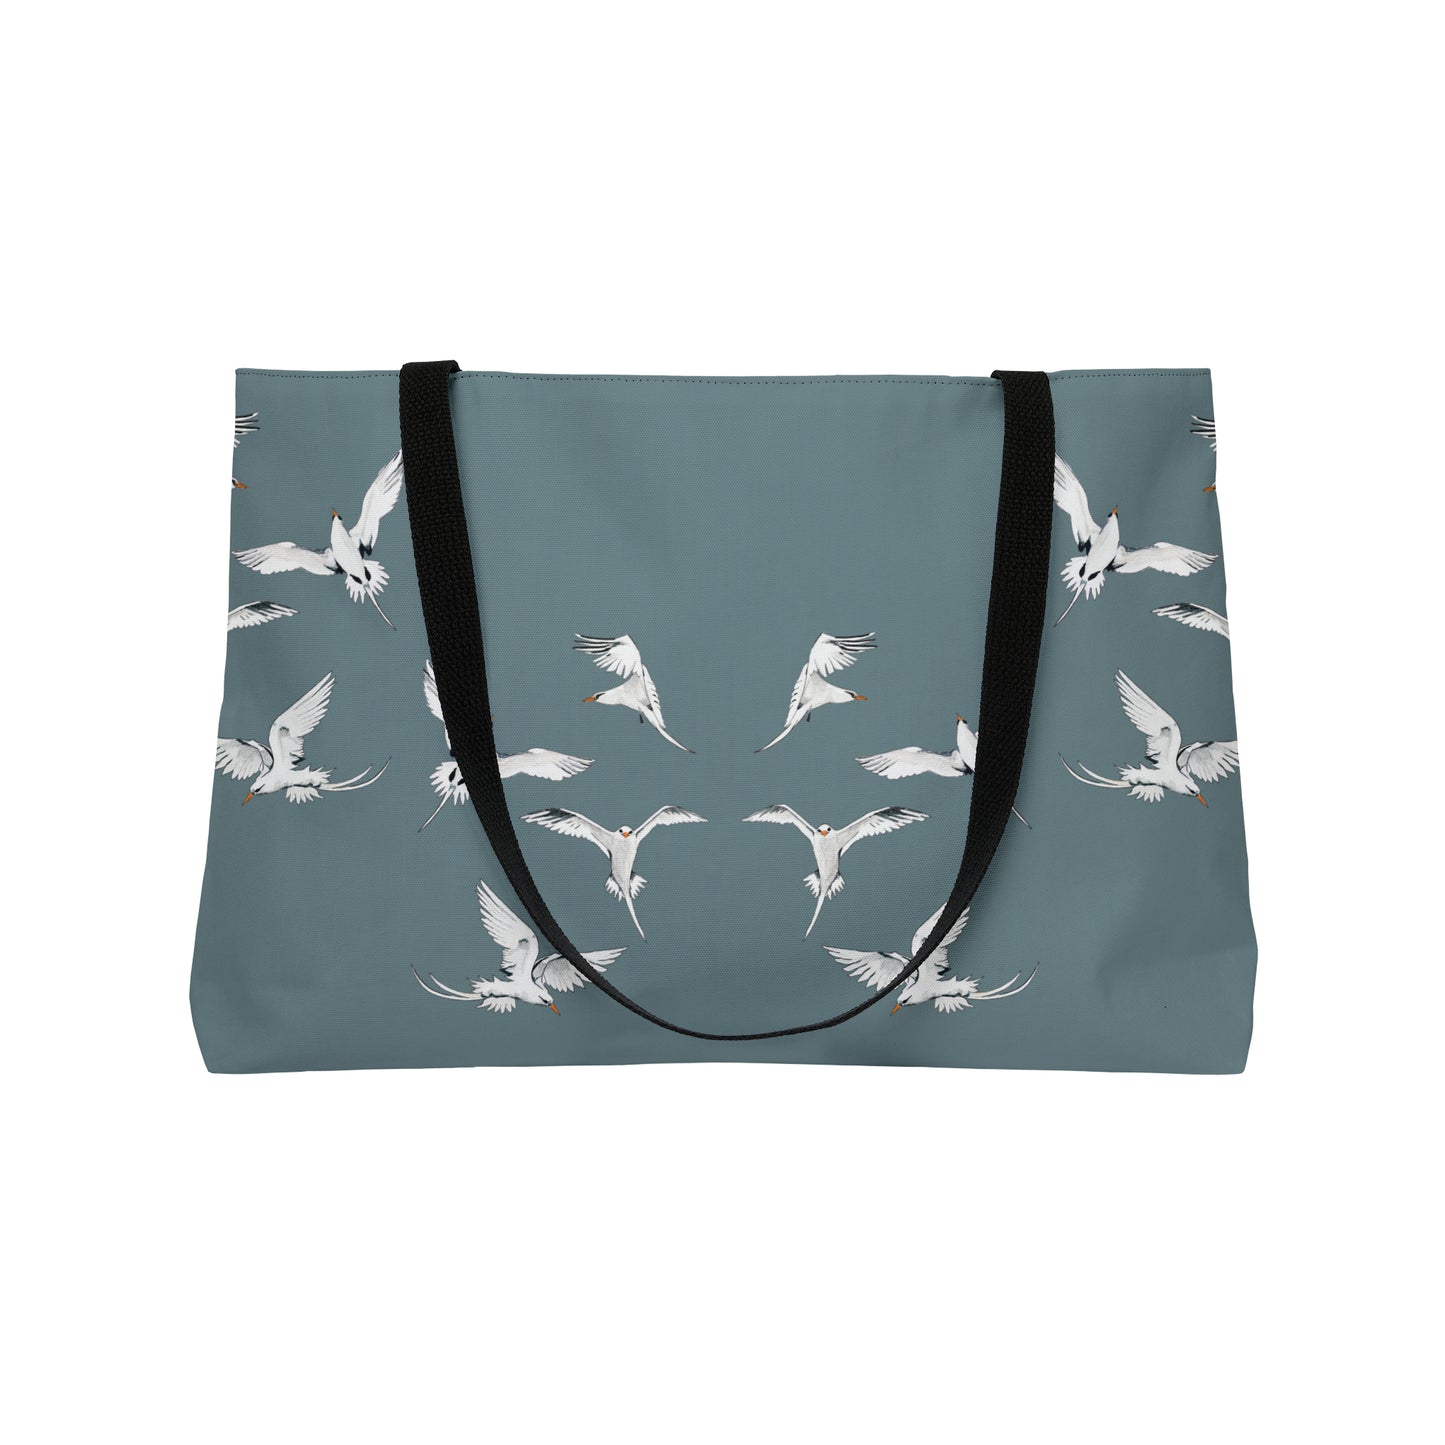 Longtails - Tote Bag - Stone